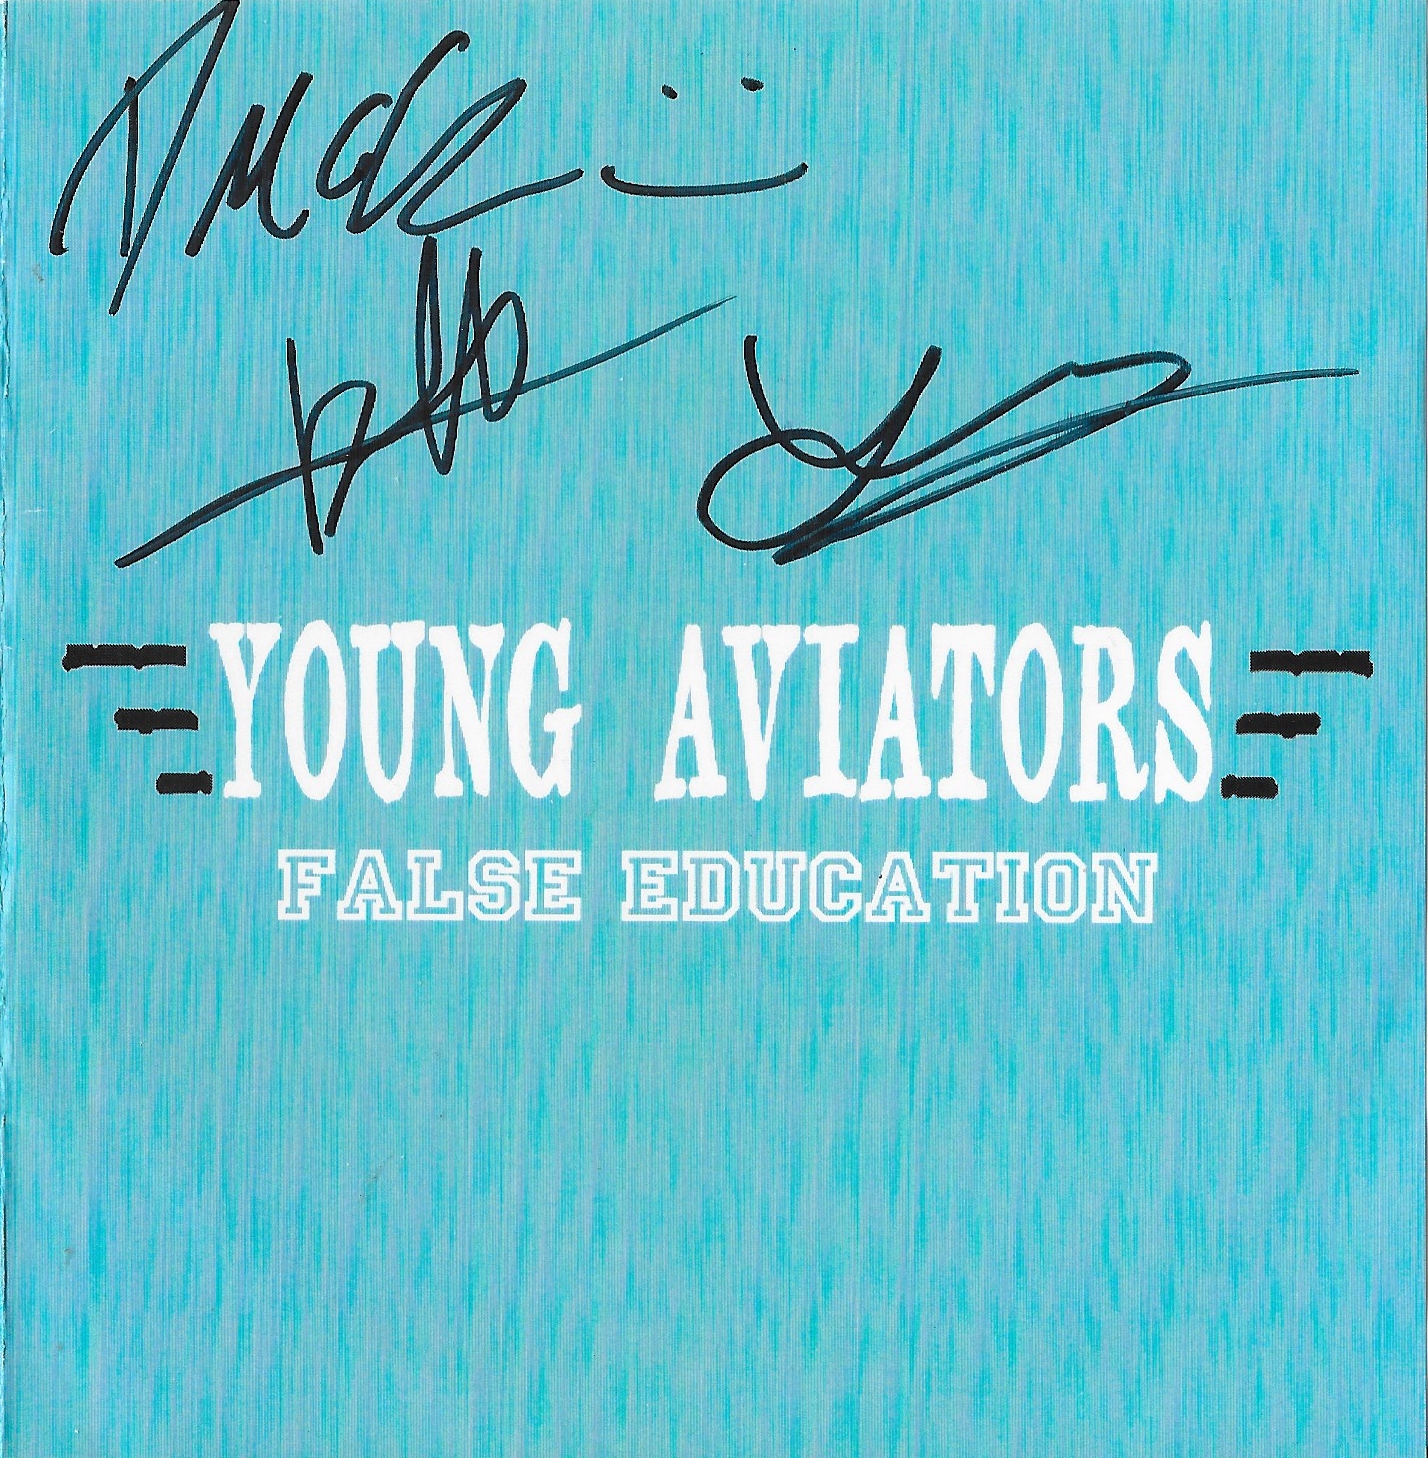 Picture of YOUNGA2--- False education by artist Young Aviators 